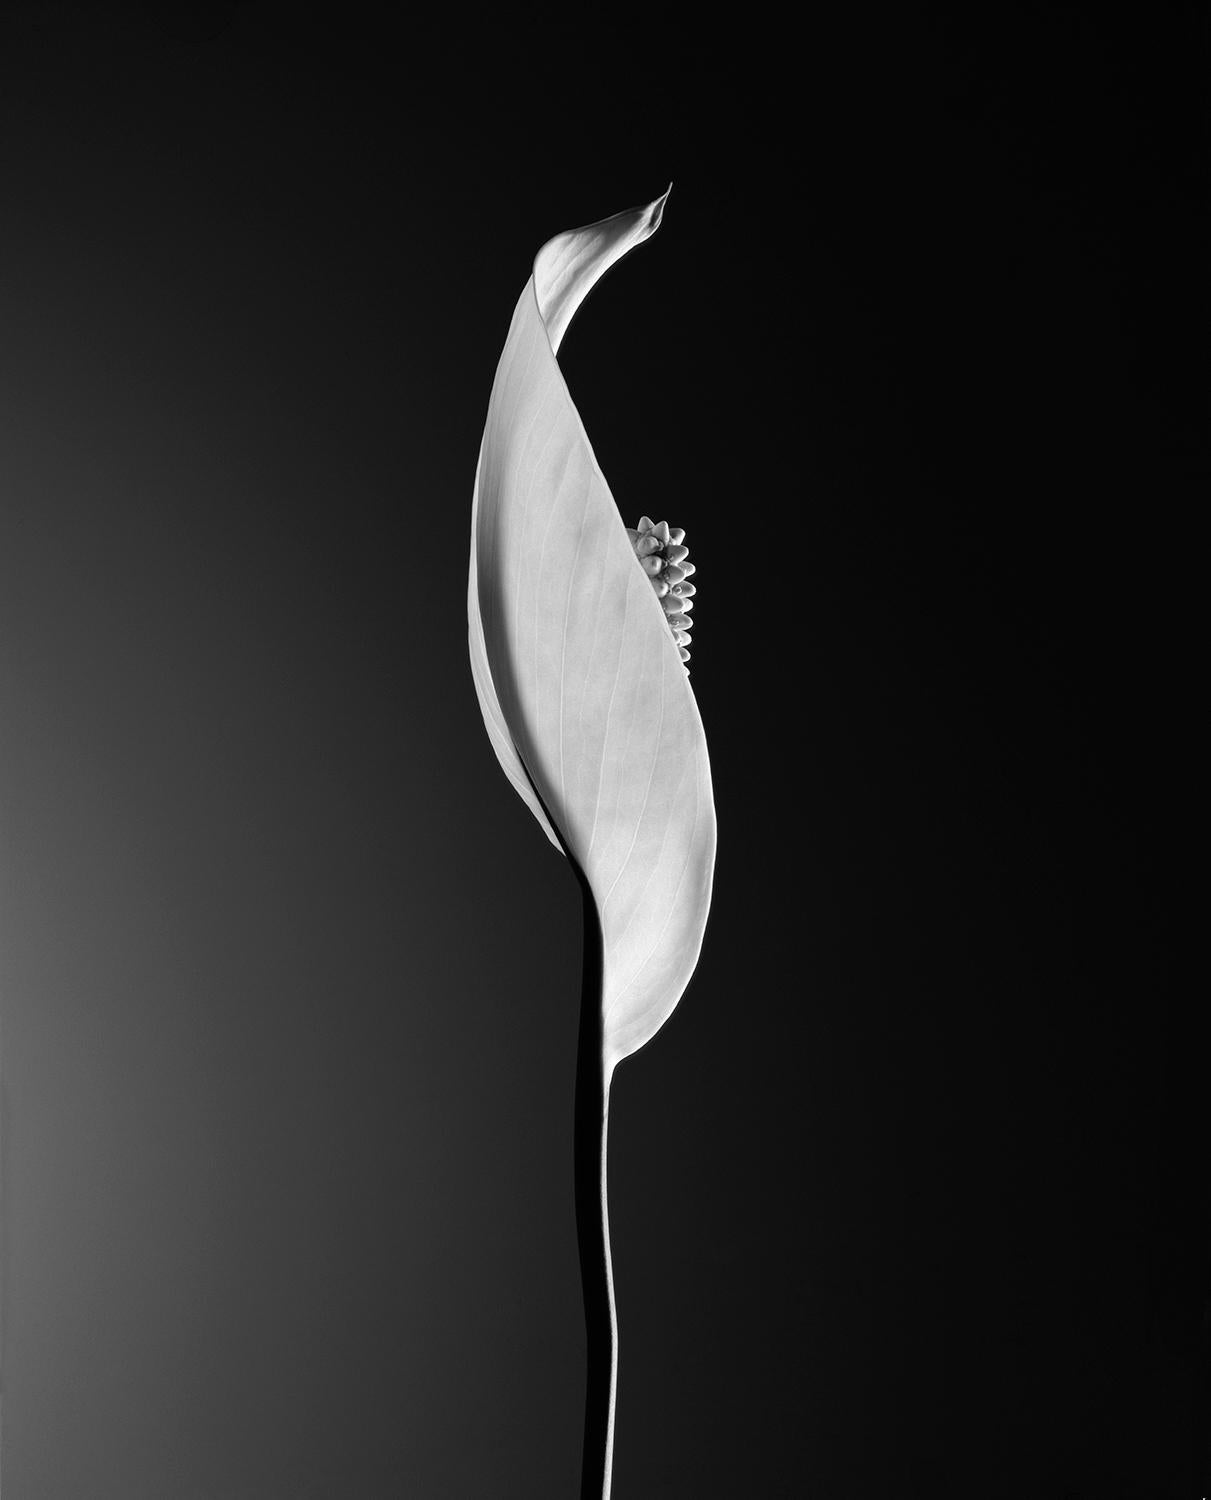 Edition of 25
signed and numbered by the artist

This picture of a flower "Calla" was shot on polaroid film.

JJK is a pseudonym for one of the world's most successful photo artists.
In his series "Always in my mind", he depicts history, feelings,